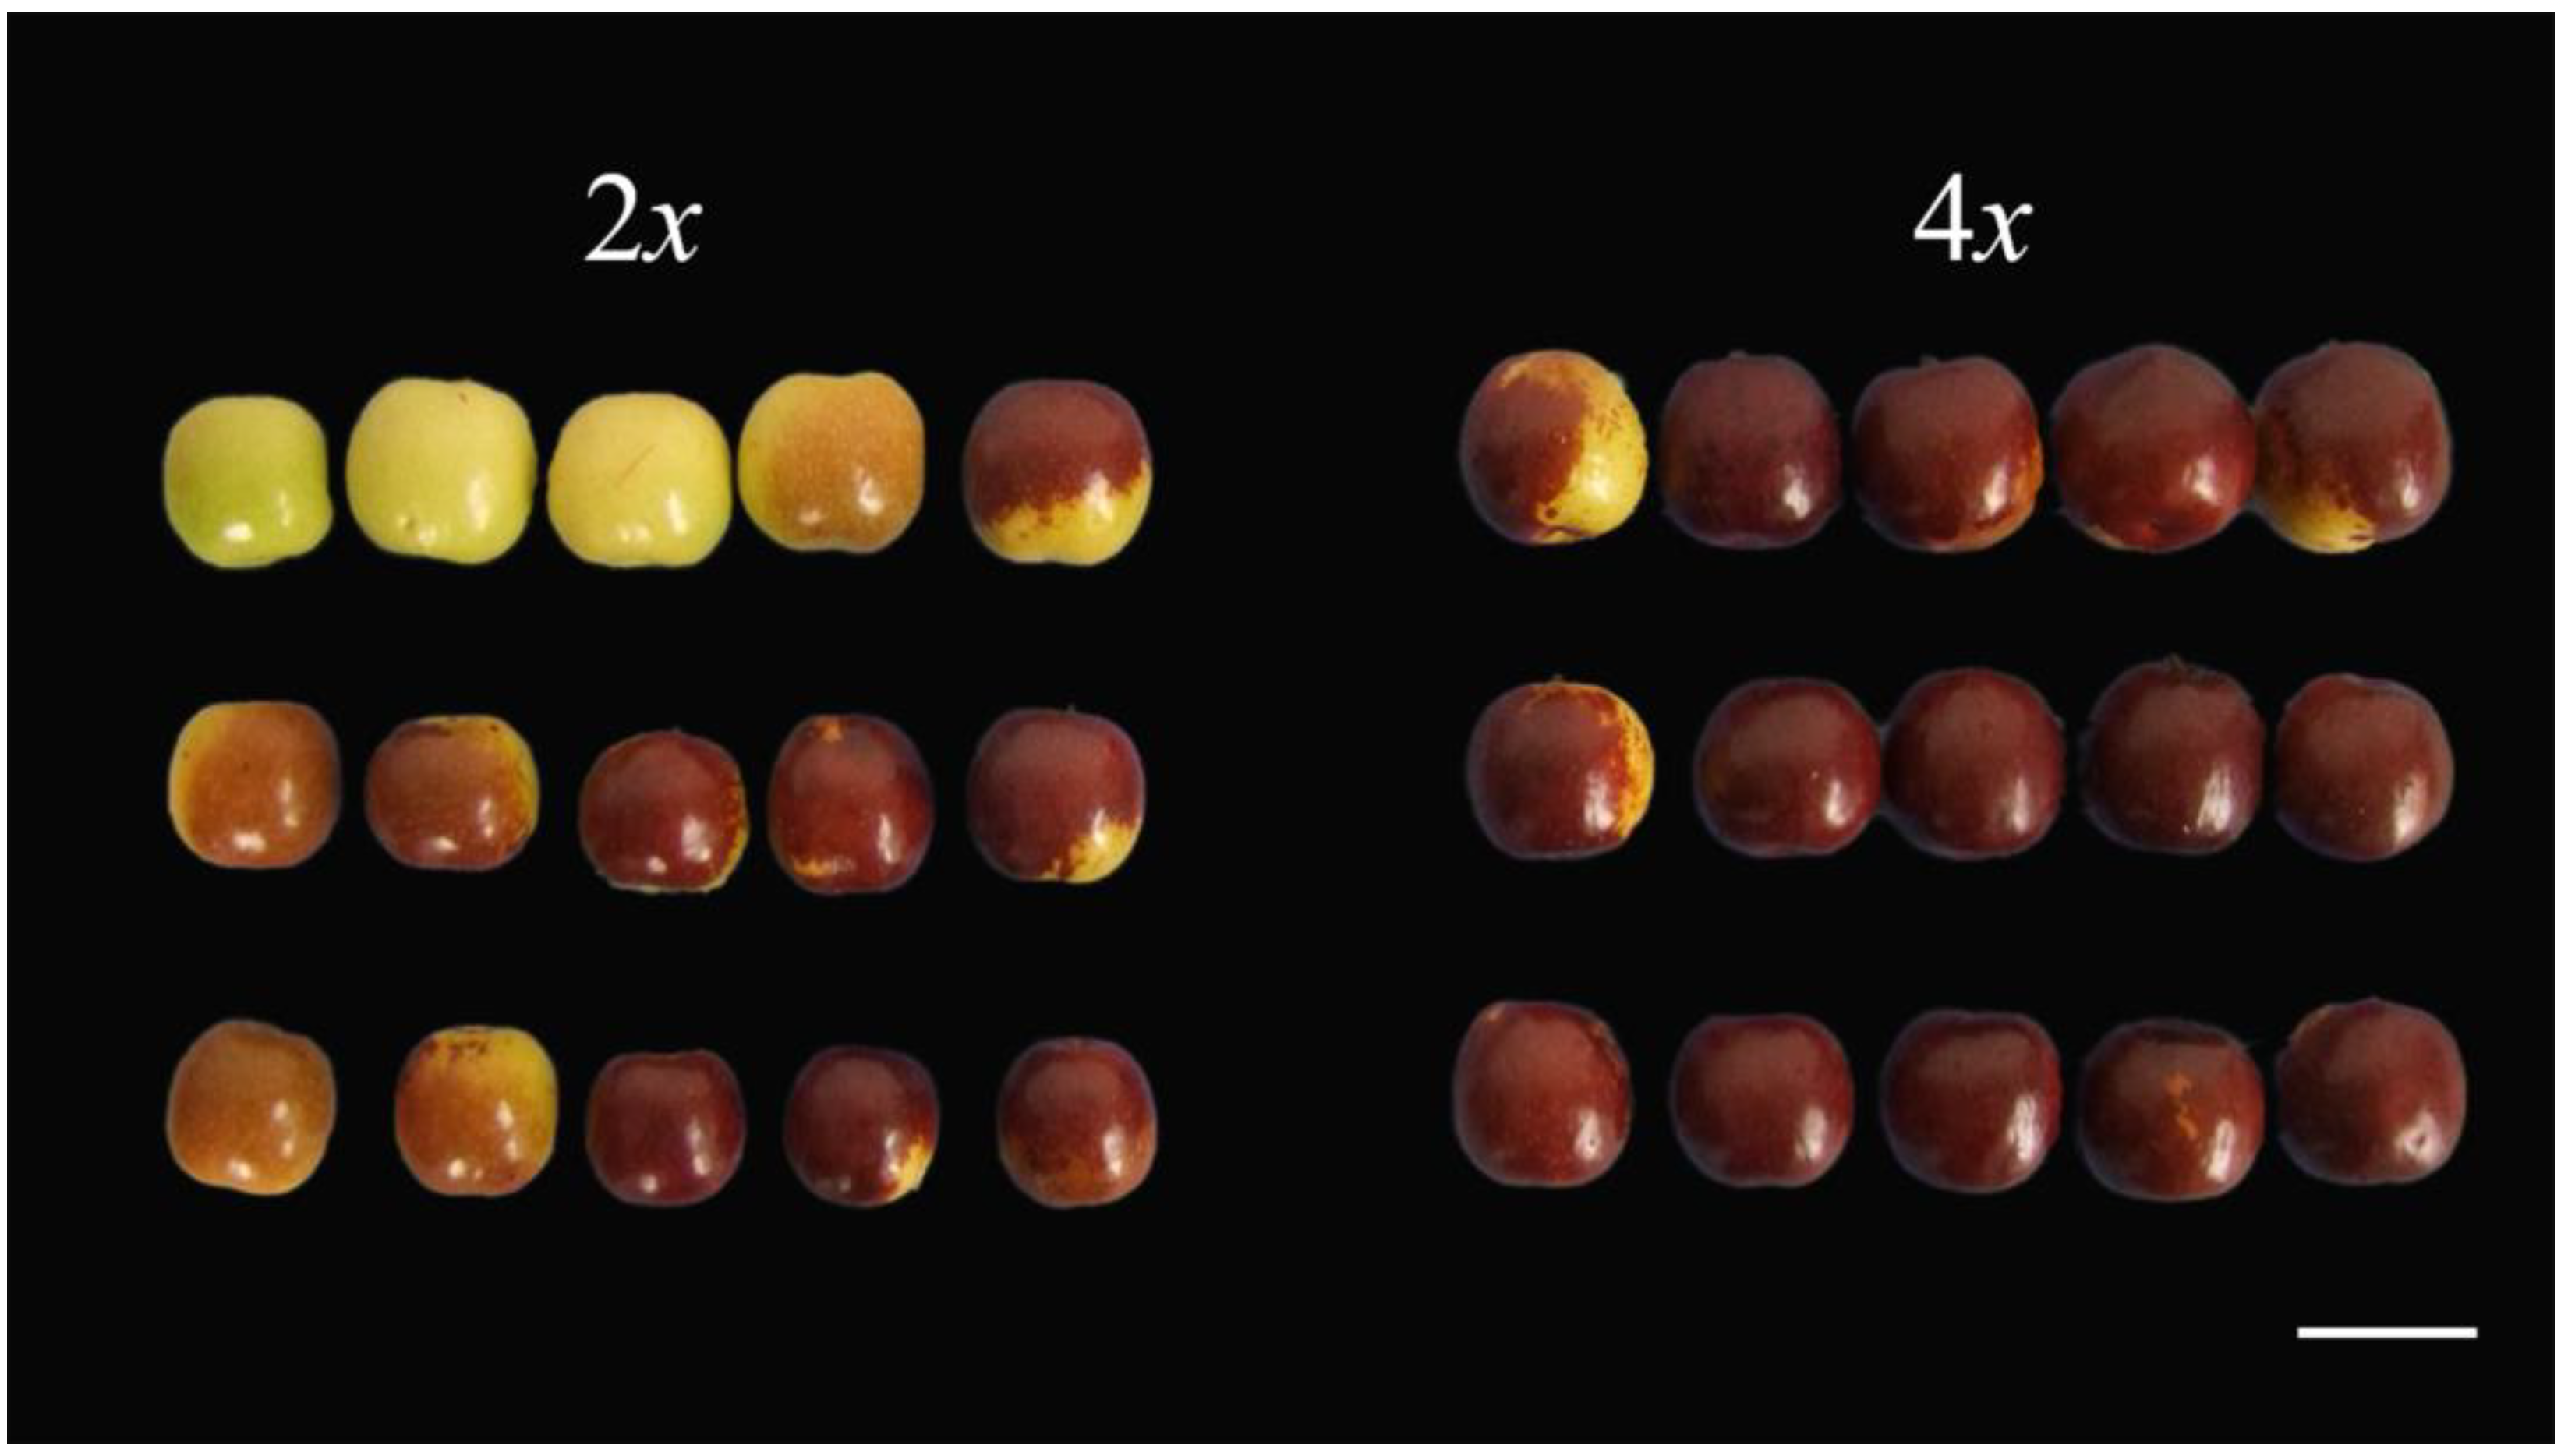 Comparison of jujube fruits containing kernels and abortive jujube